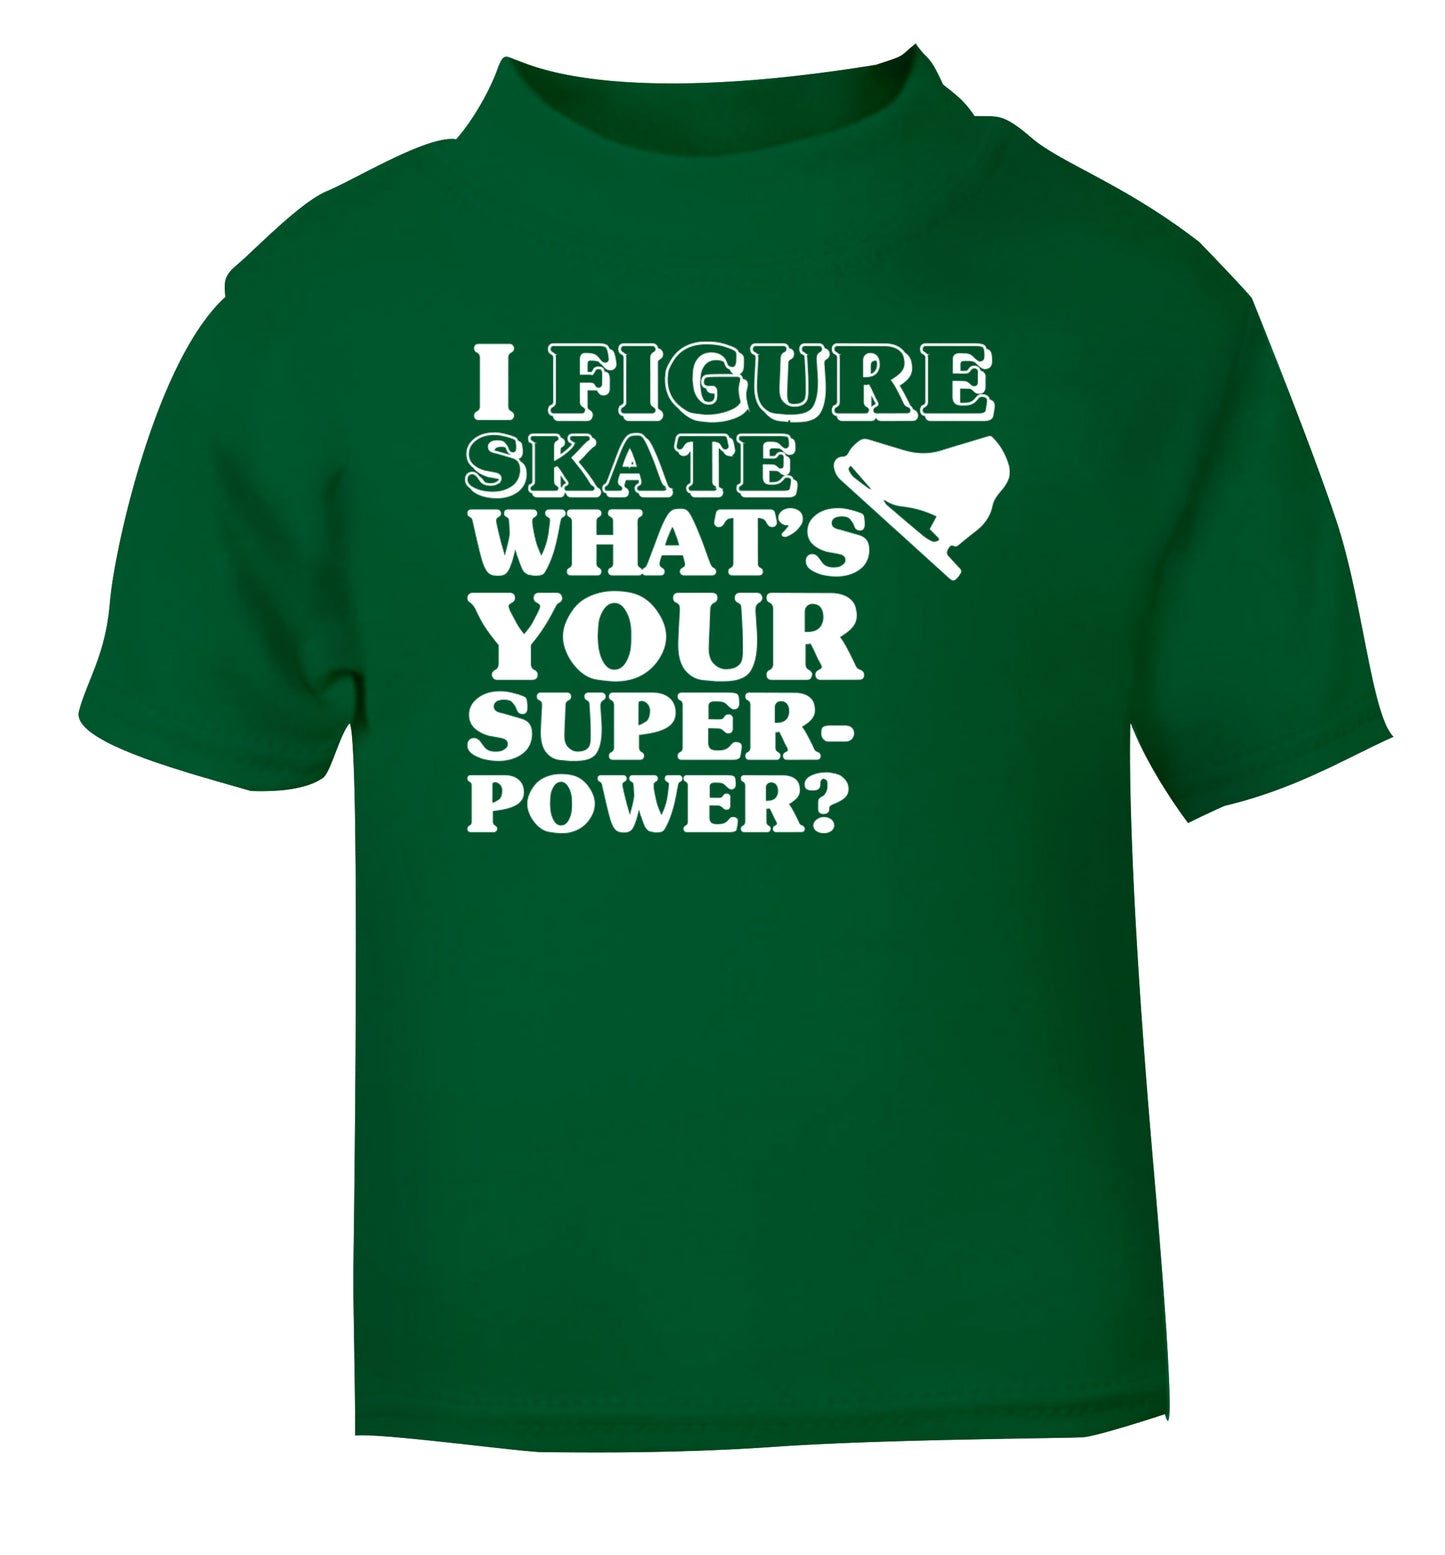 I figure skate what's your superpower? green Baby Toddler Tshirt 2 Years